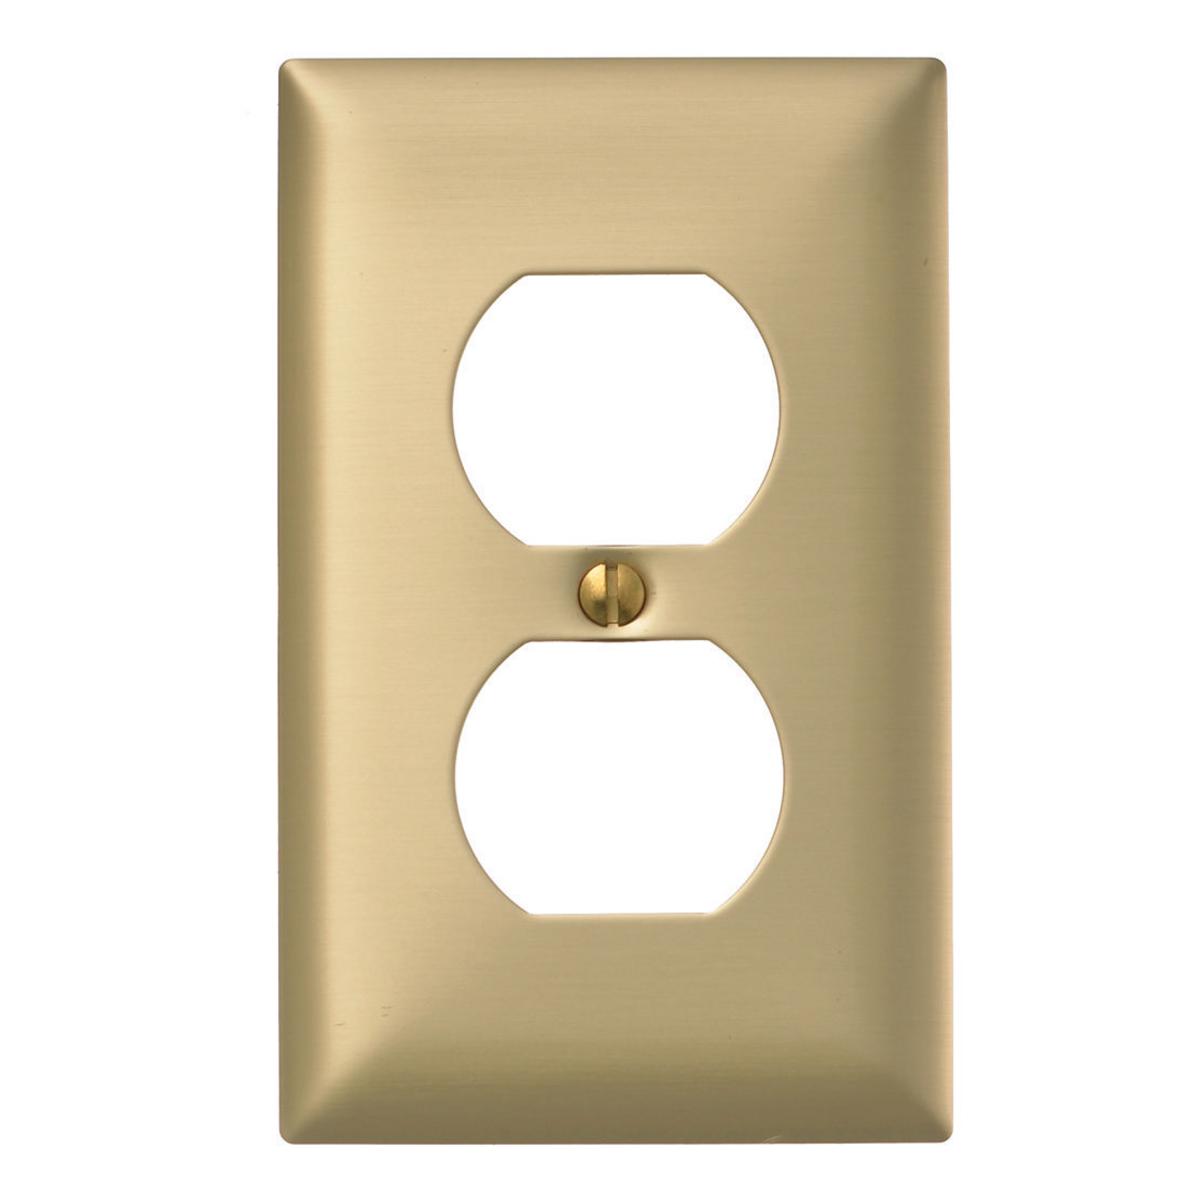 Hubbell SBP8 Wallplates and Boxes, Metallic Plates, 1- Gang, 1) 1.40" Opening, Standard Size, Brass Plated Steel  ; Non-magnetic and corrosion resistant ; Finish is lacquer coated to inhibit oxidation ; Protective plastic film helps to prevent scratches and damage ; P